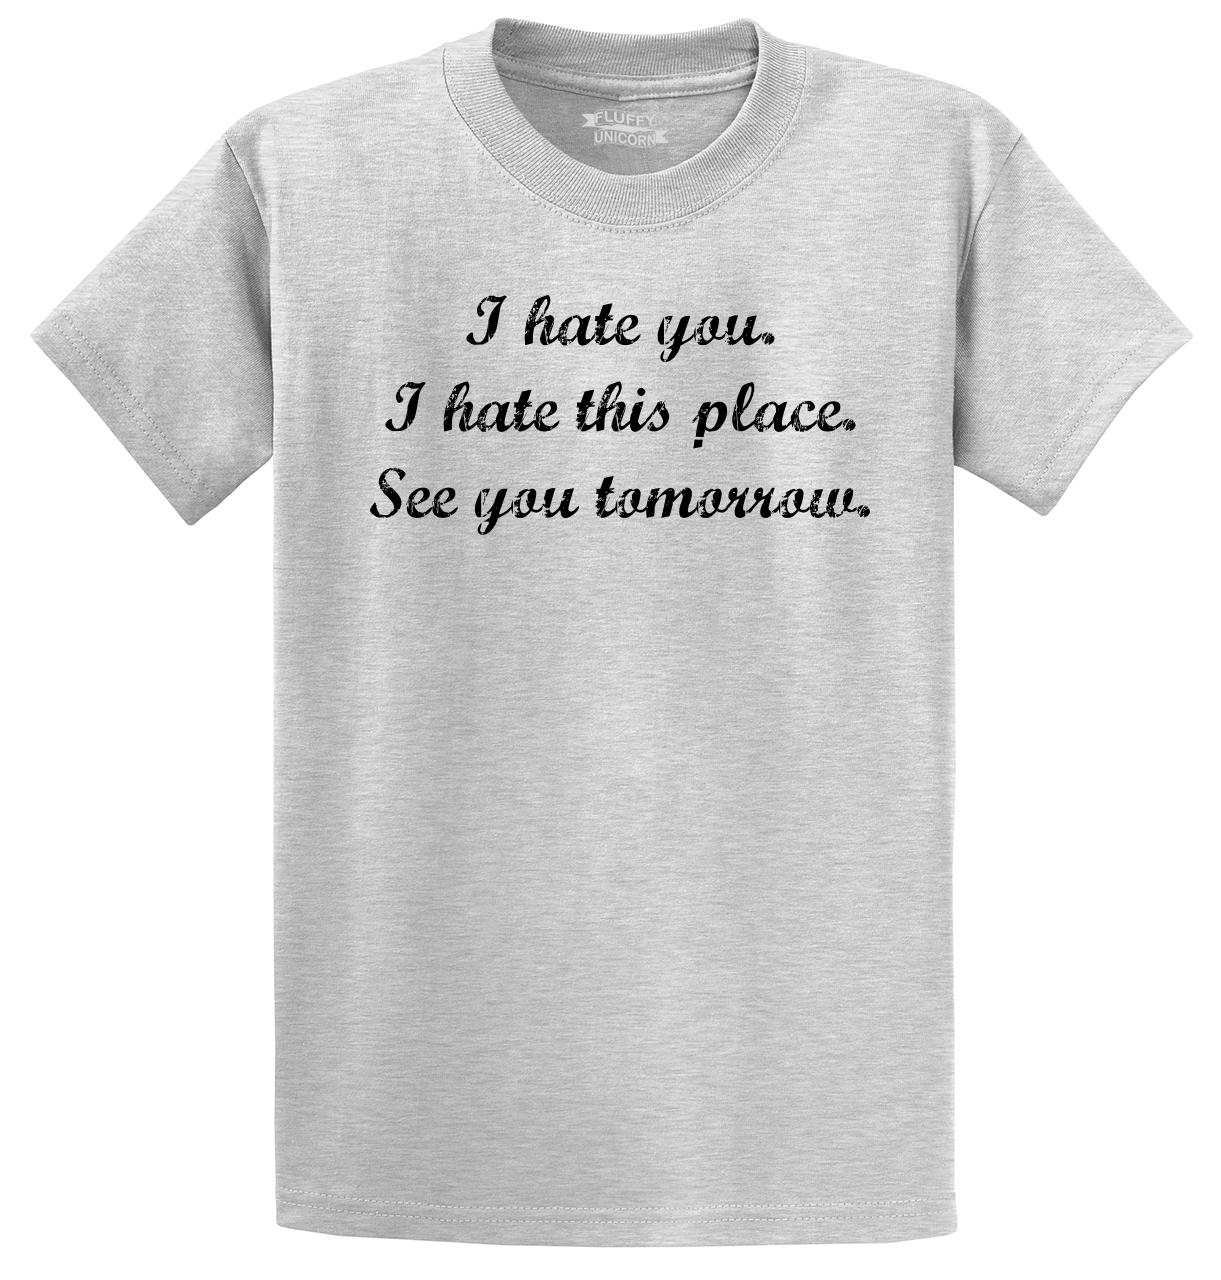 I Hate You This Place See You Tomorrow Funny T Shirt Anti Social T Tee S 5xl Ebay